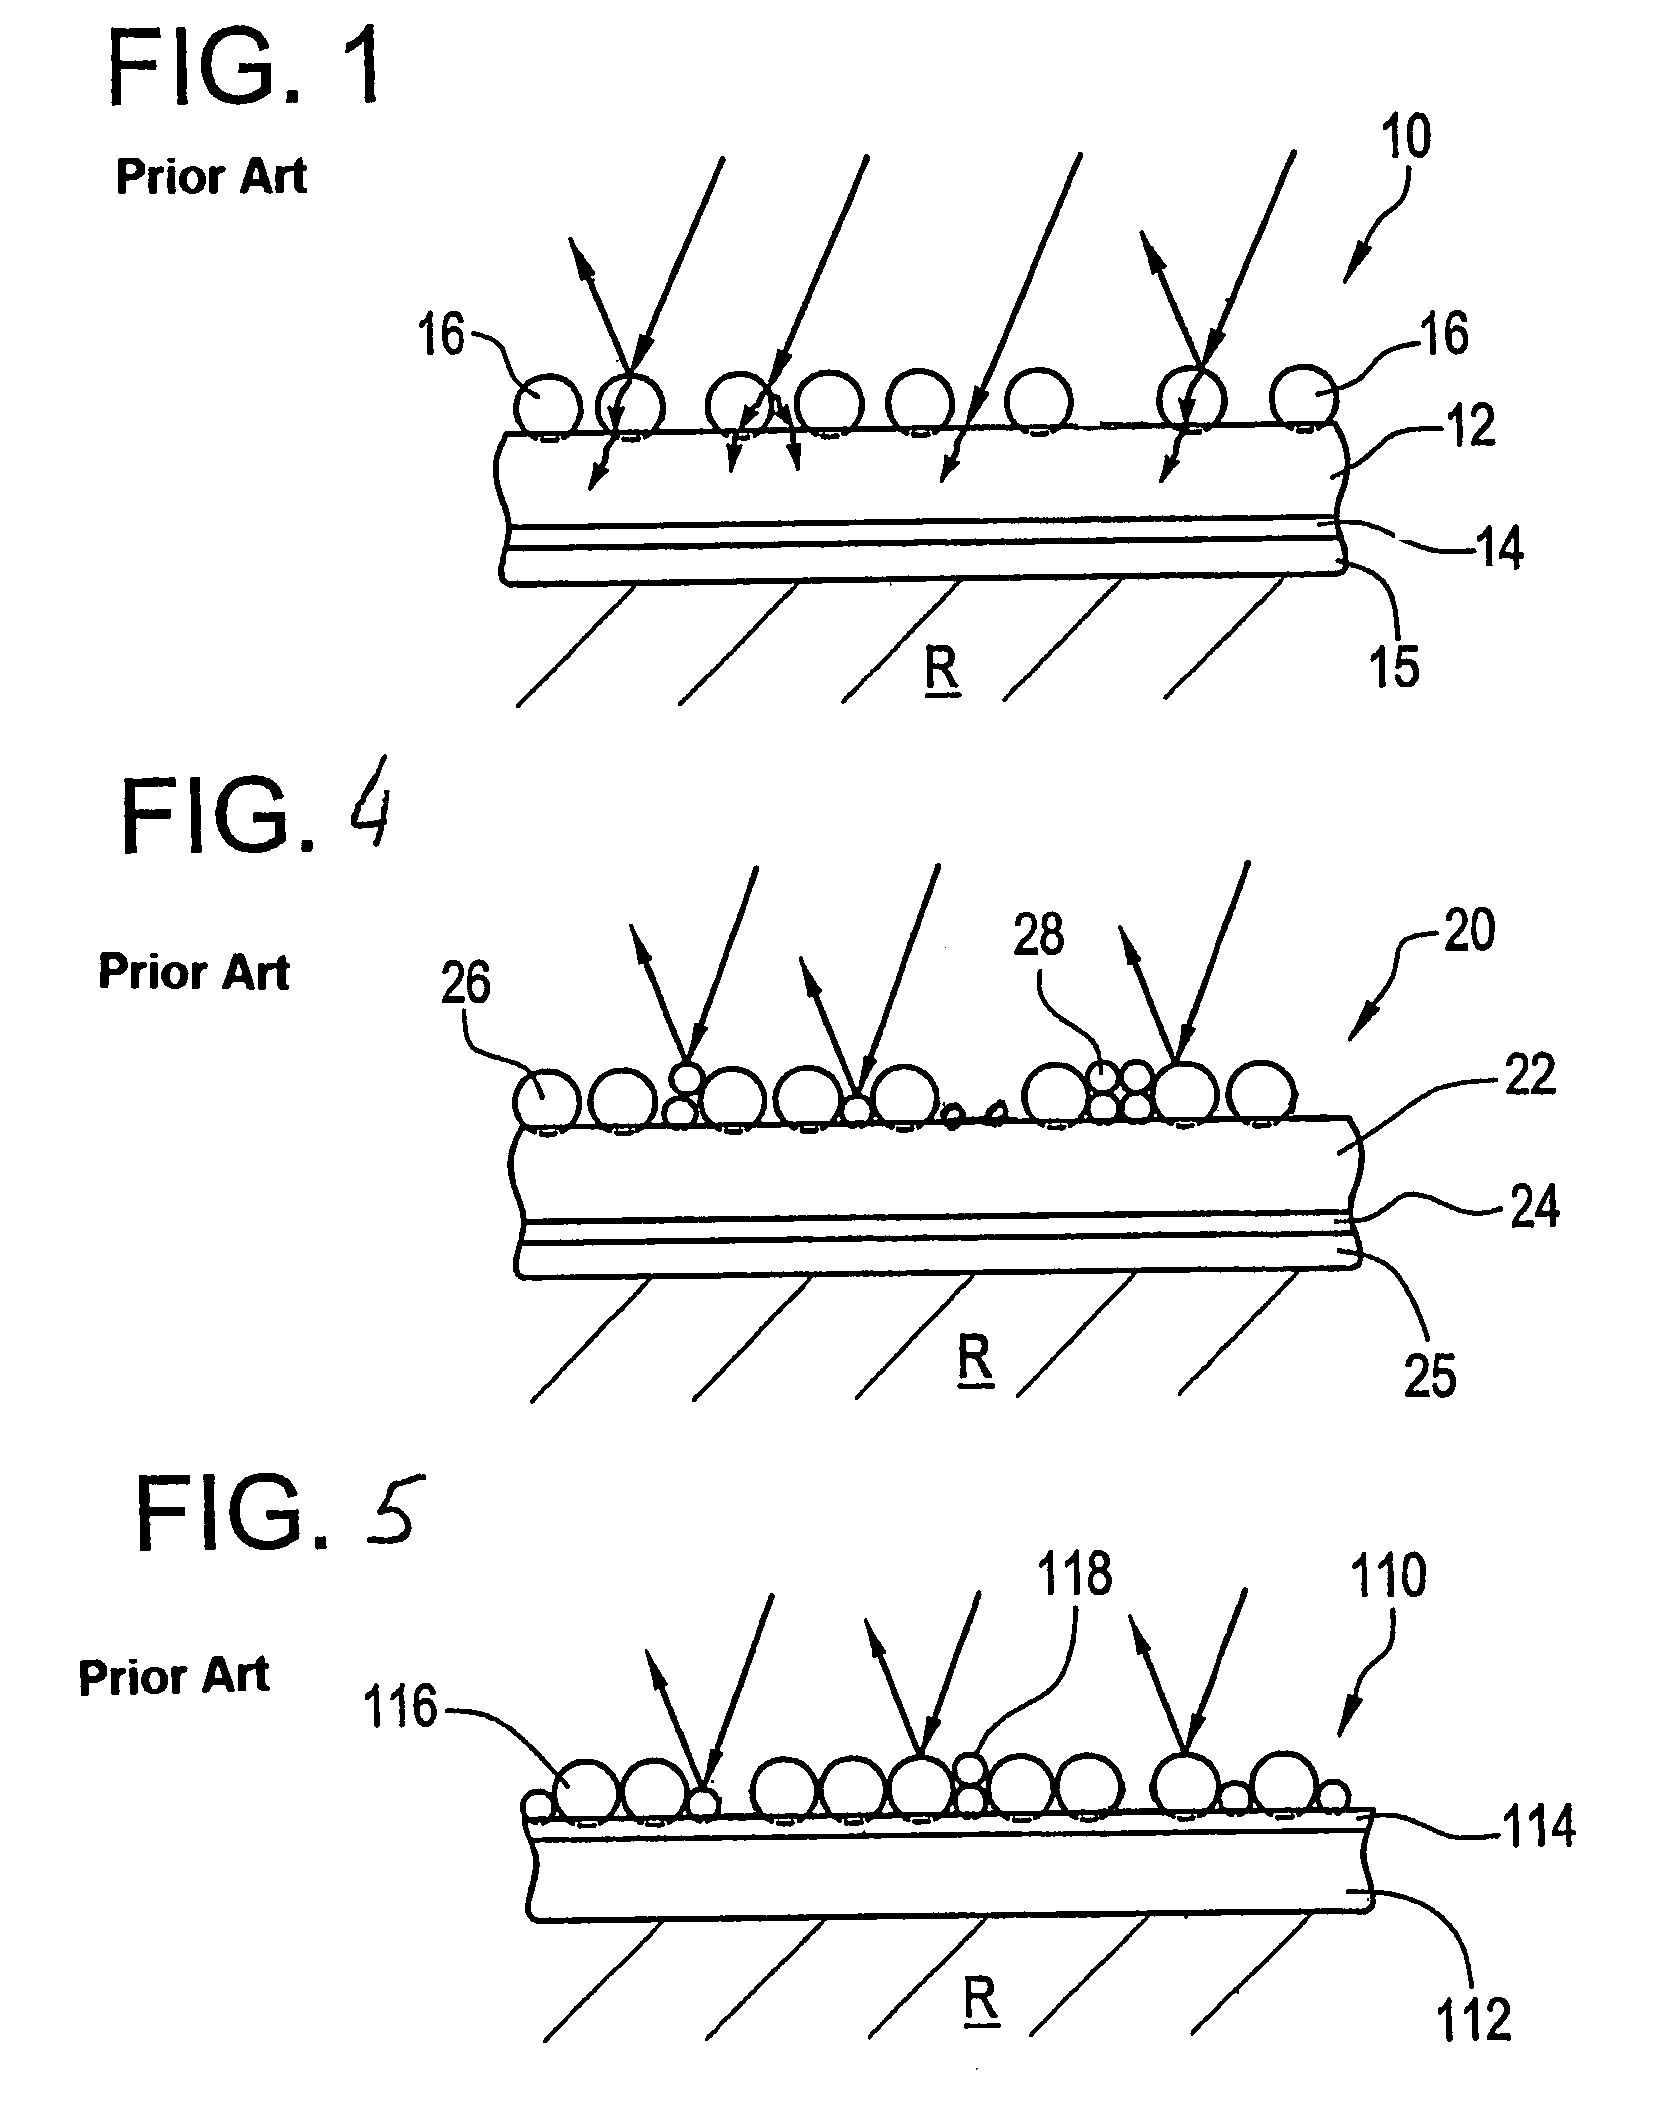 Method of forming a prefabricated roofing or siding material